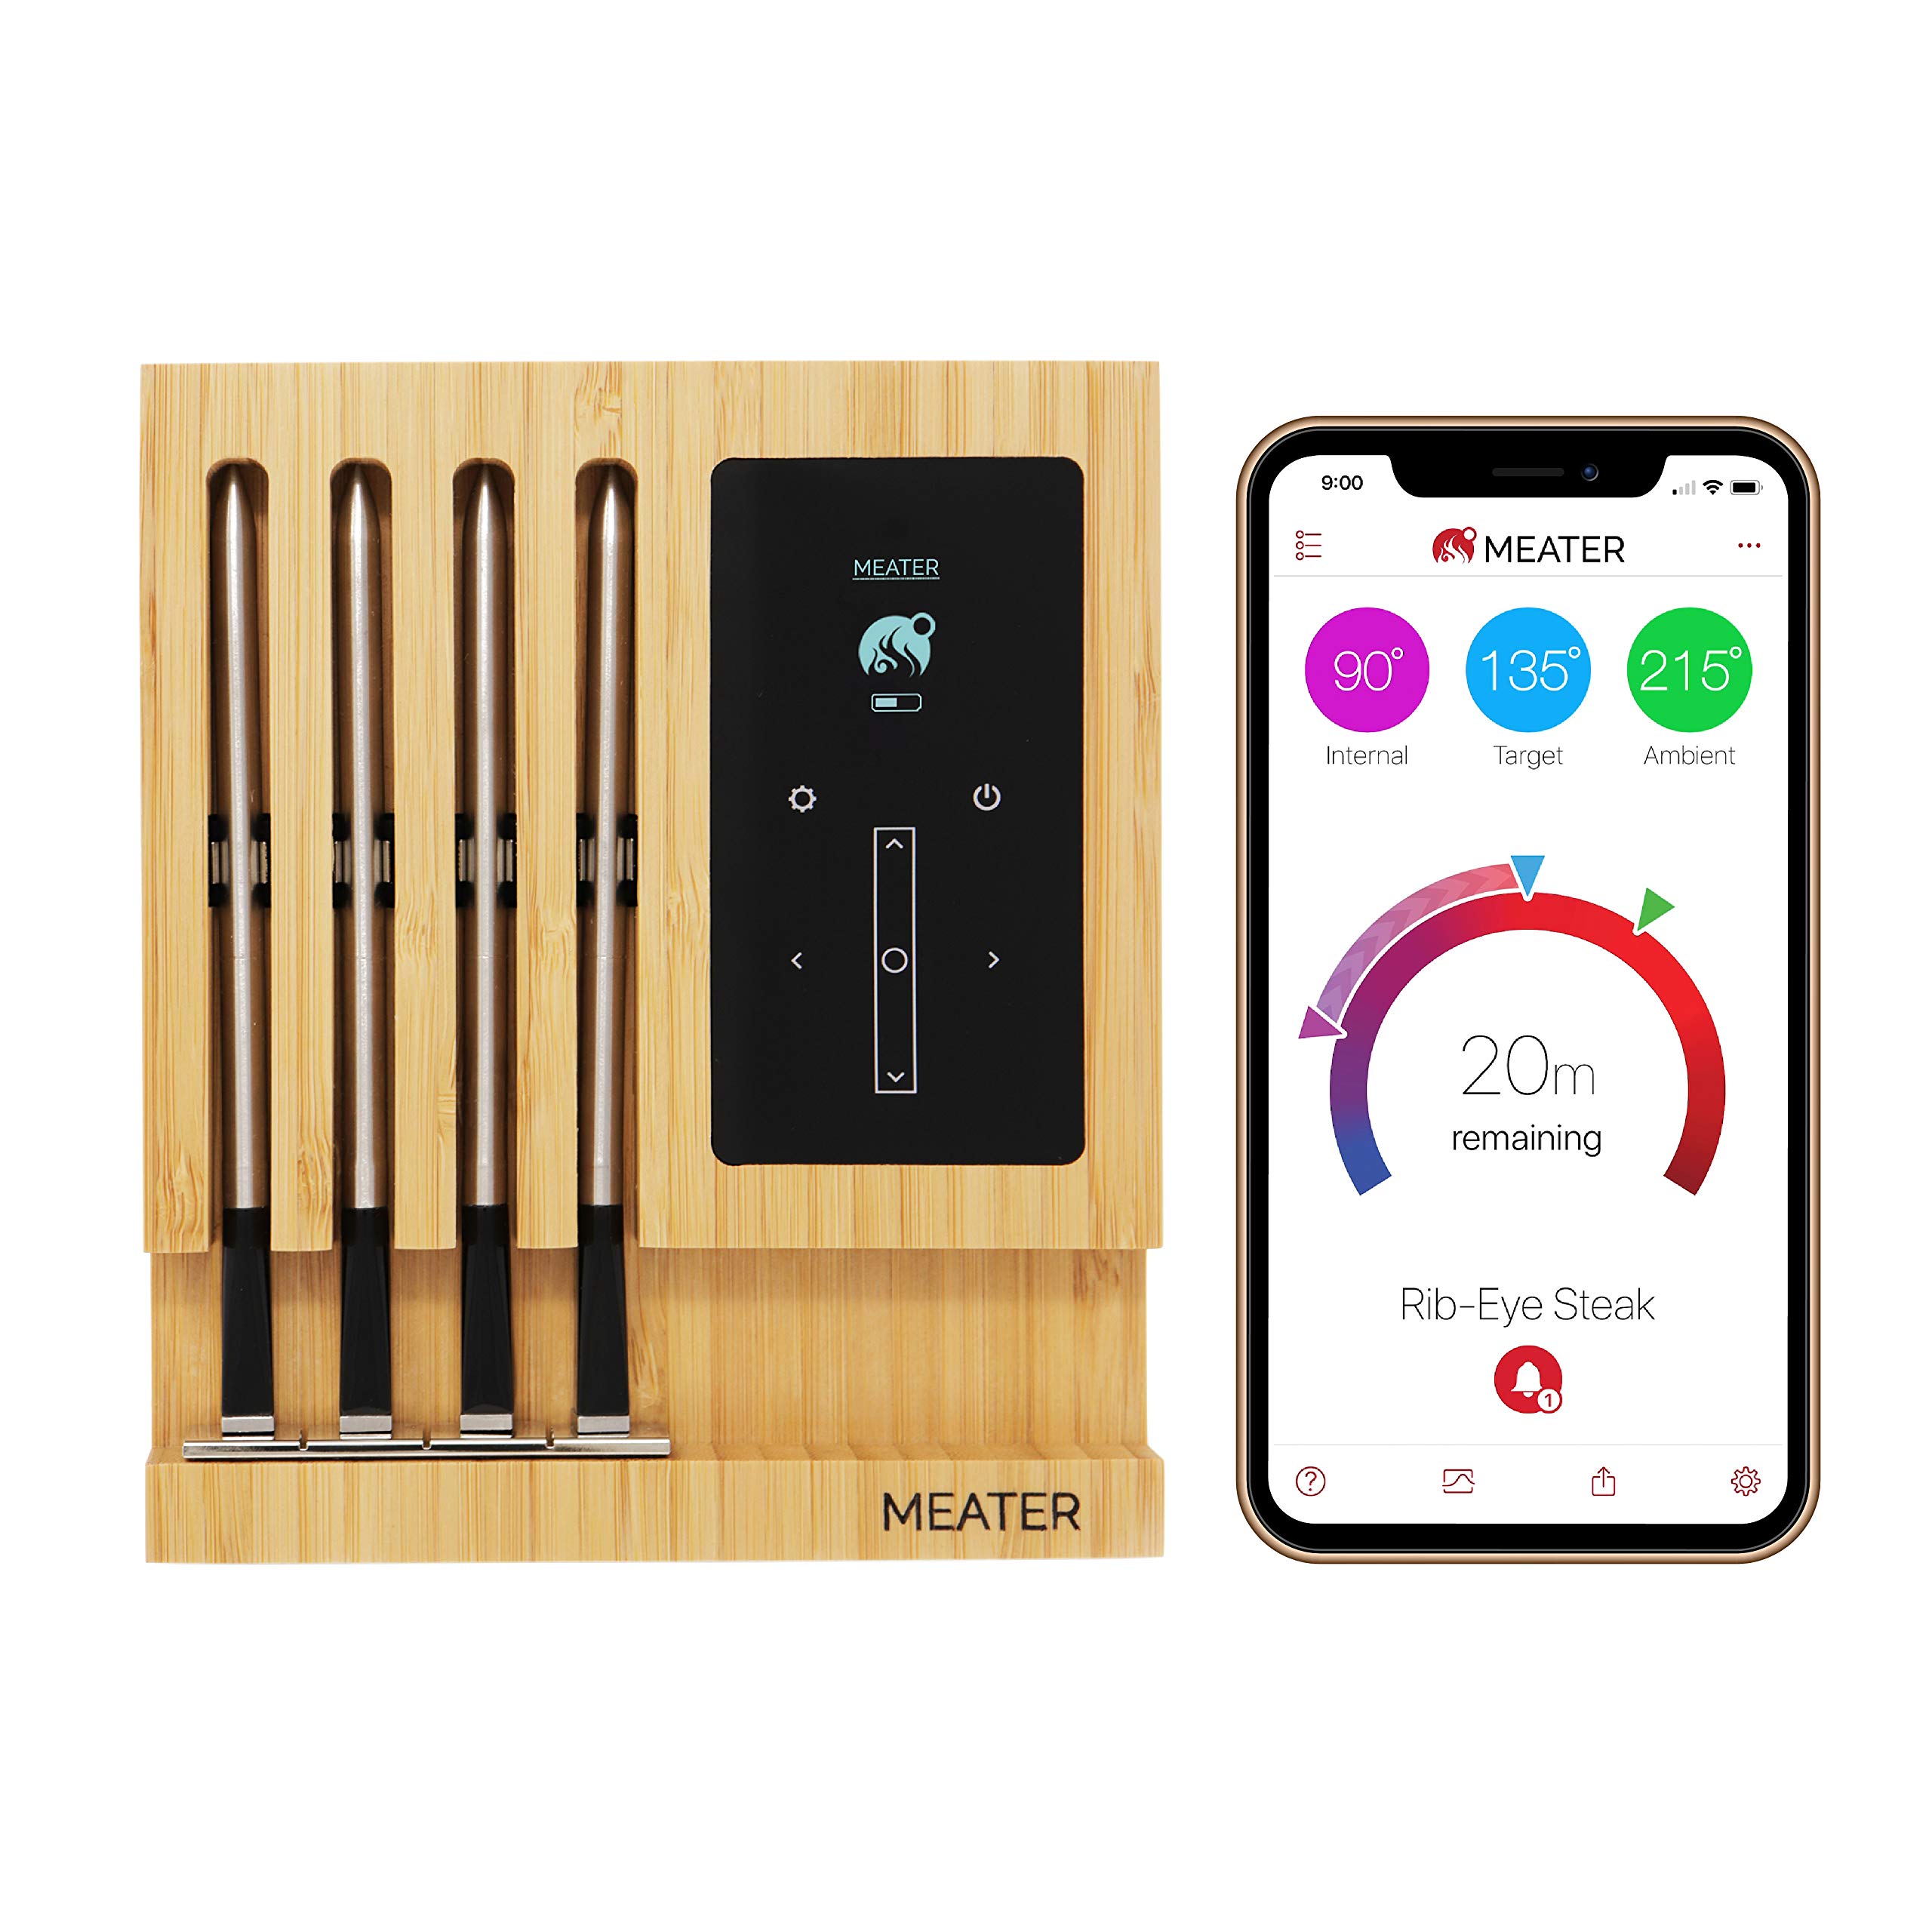 Limited-time deal: MEATER Block: 4-Probe Premium WiFi Smart Meat Thermometer | for BBQ, Oven, Grill, Kitchen, Smoker, Rotisserie | iOS & Android App | Apple Watch, Alexa  - $199